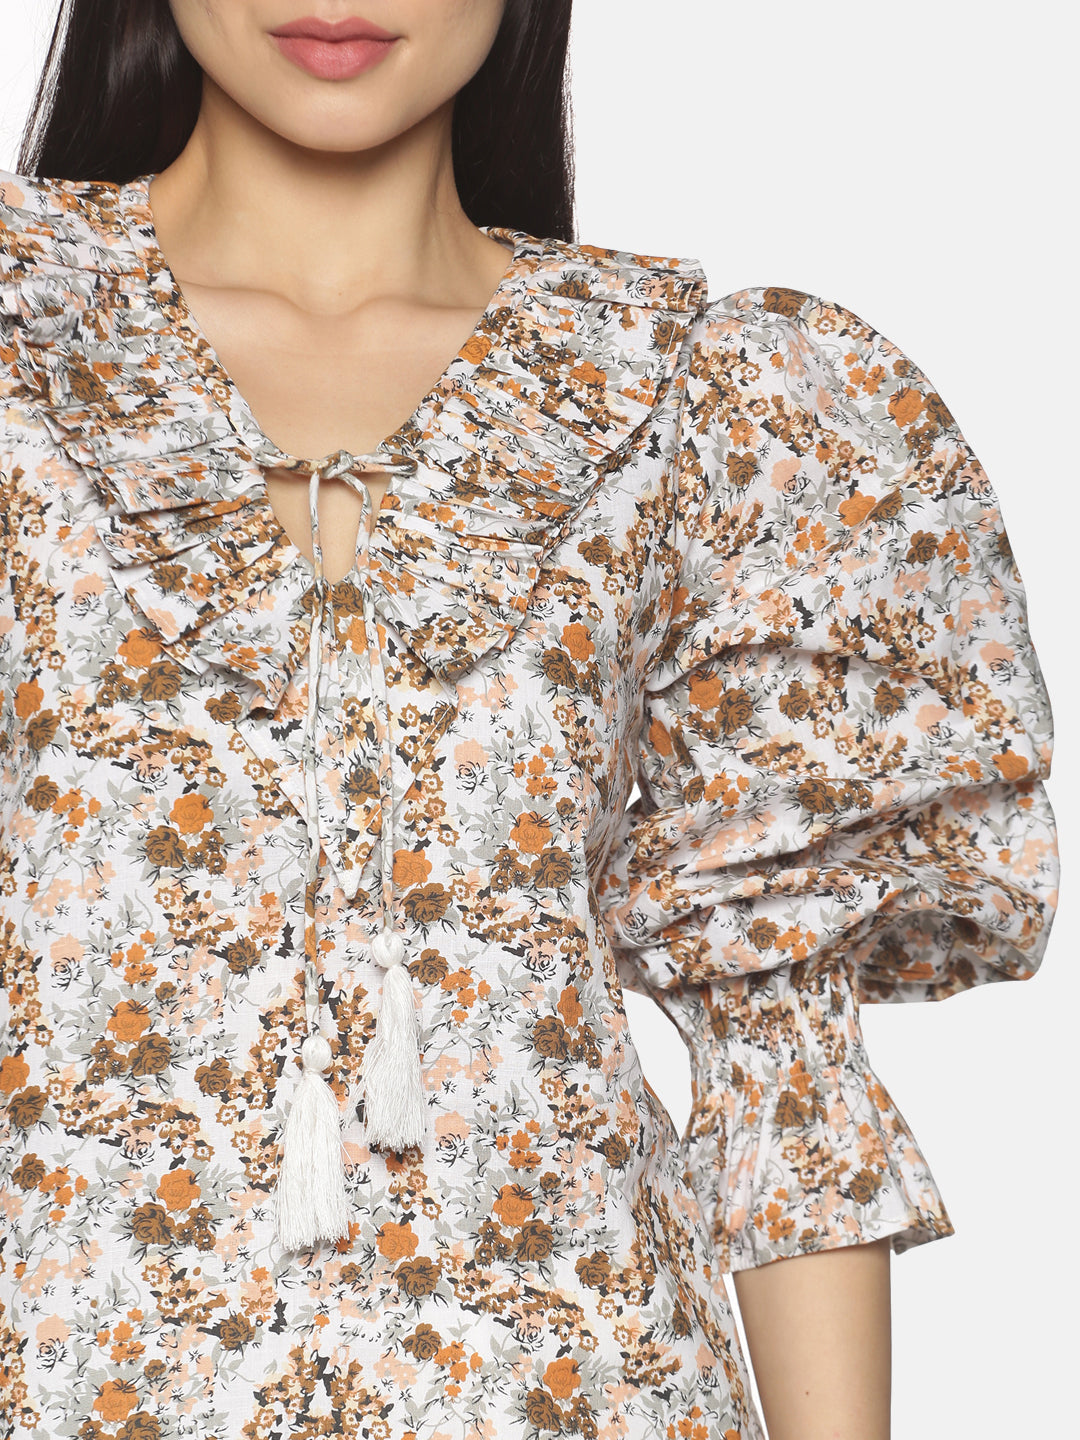 IS.U Brown Floral Balloon Sleeve Relaxed Fit Top